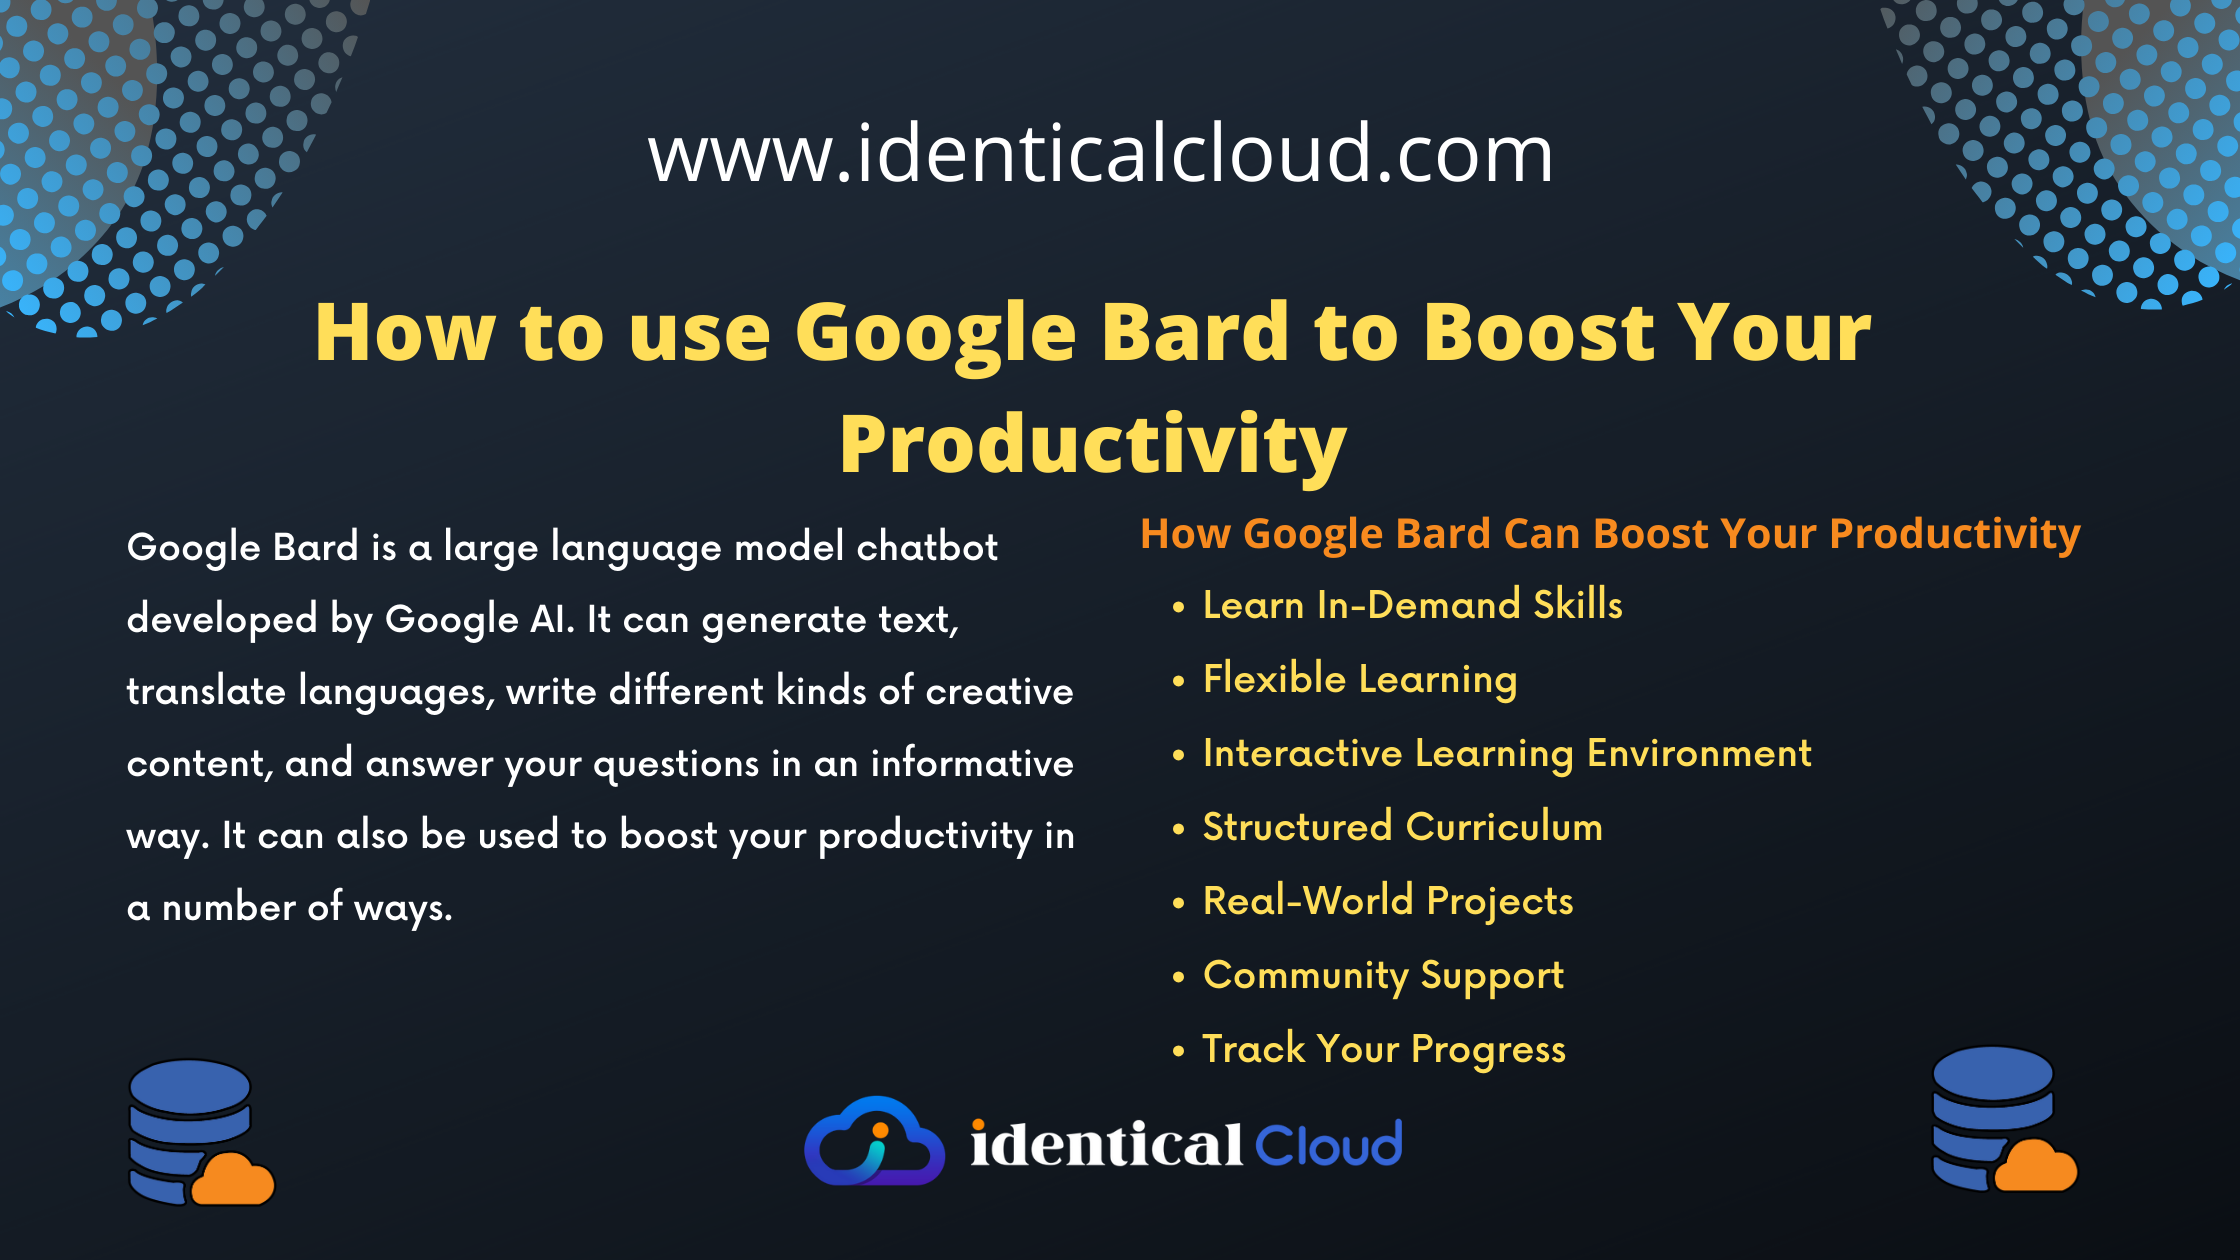 How to use Google Bard to Boost Your Productivity - identicalcloud.com